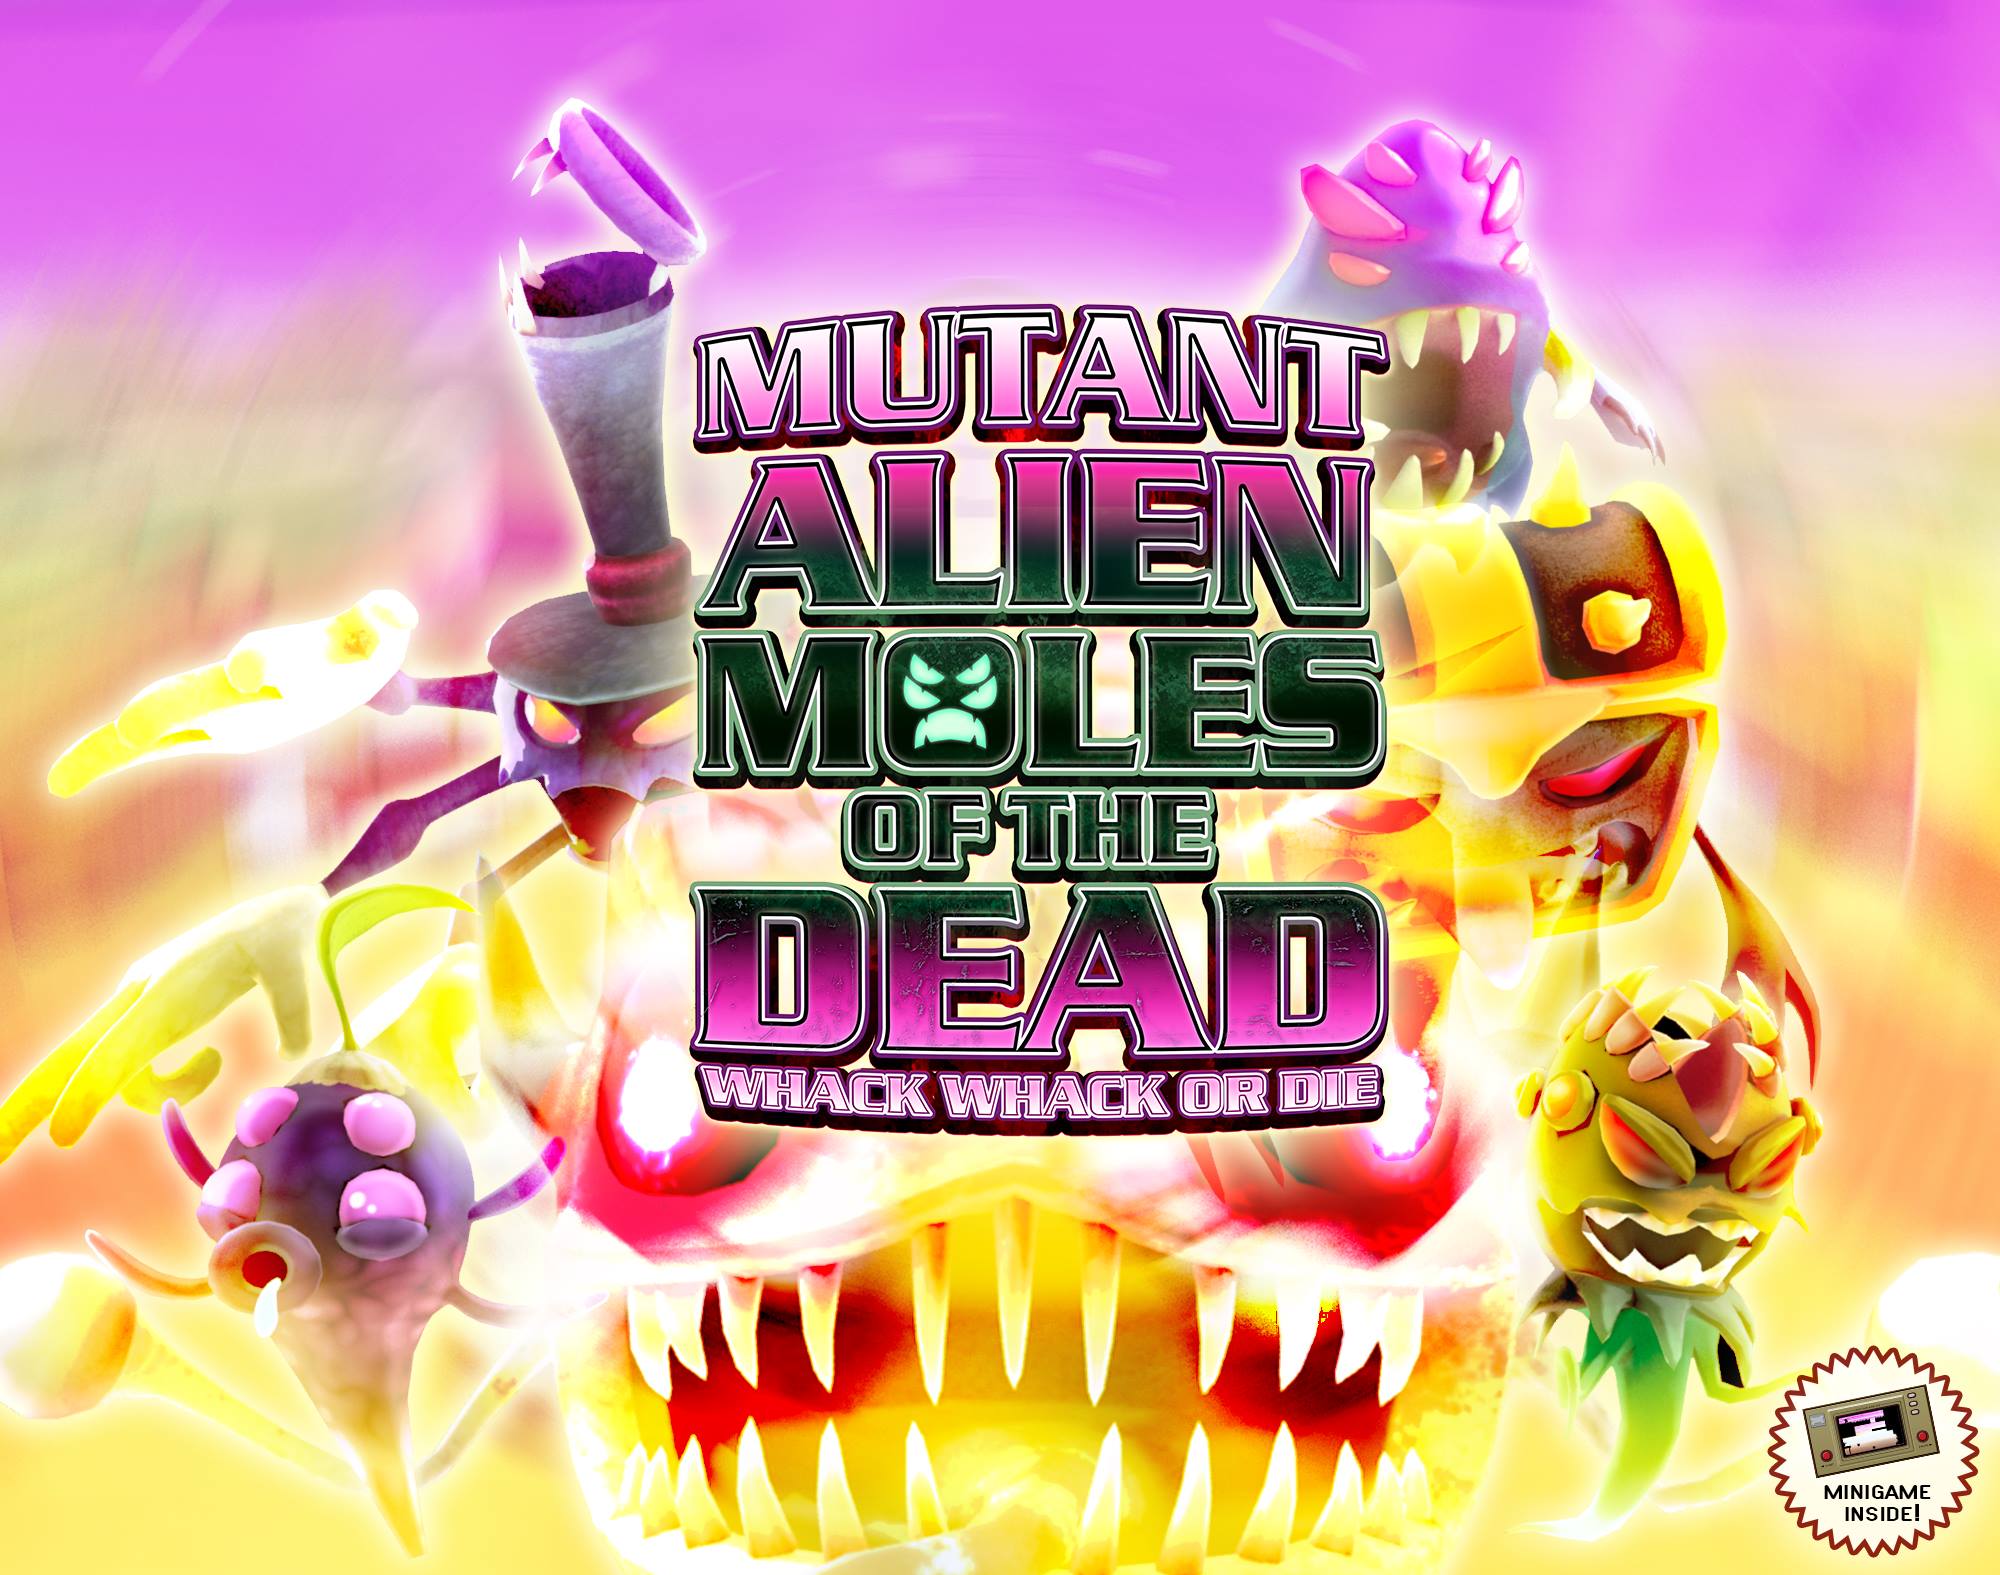 Mutant Alien Moles of the Dead is a new game for… The Wii U?